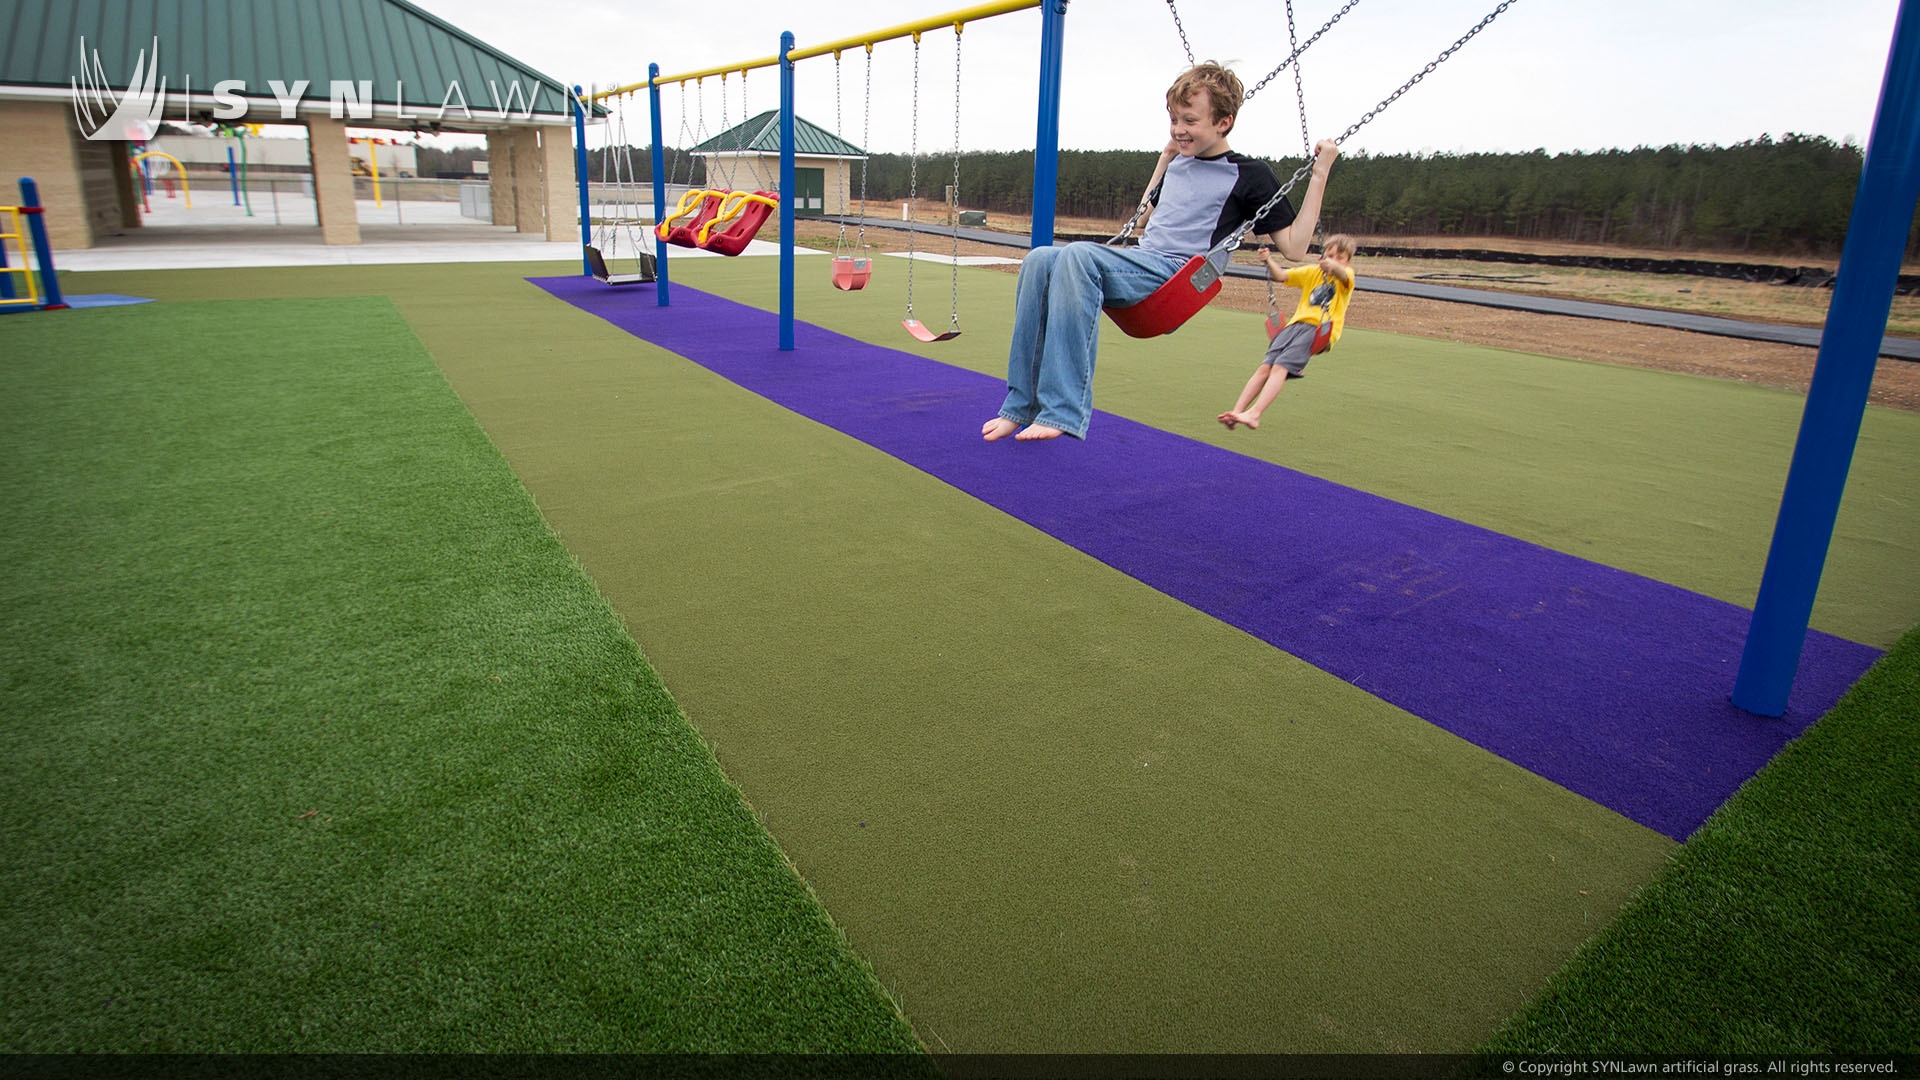 Swingset installed on artificial playground grass